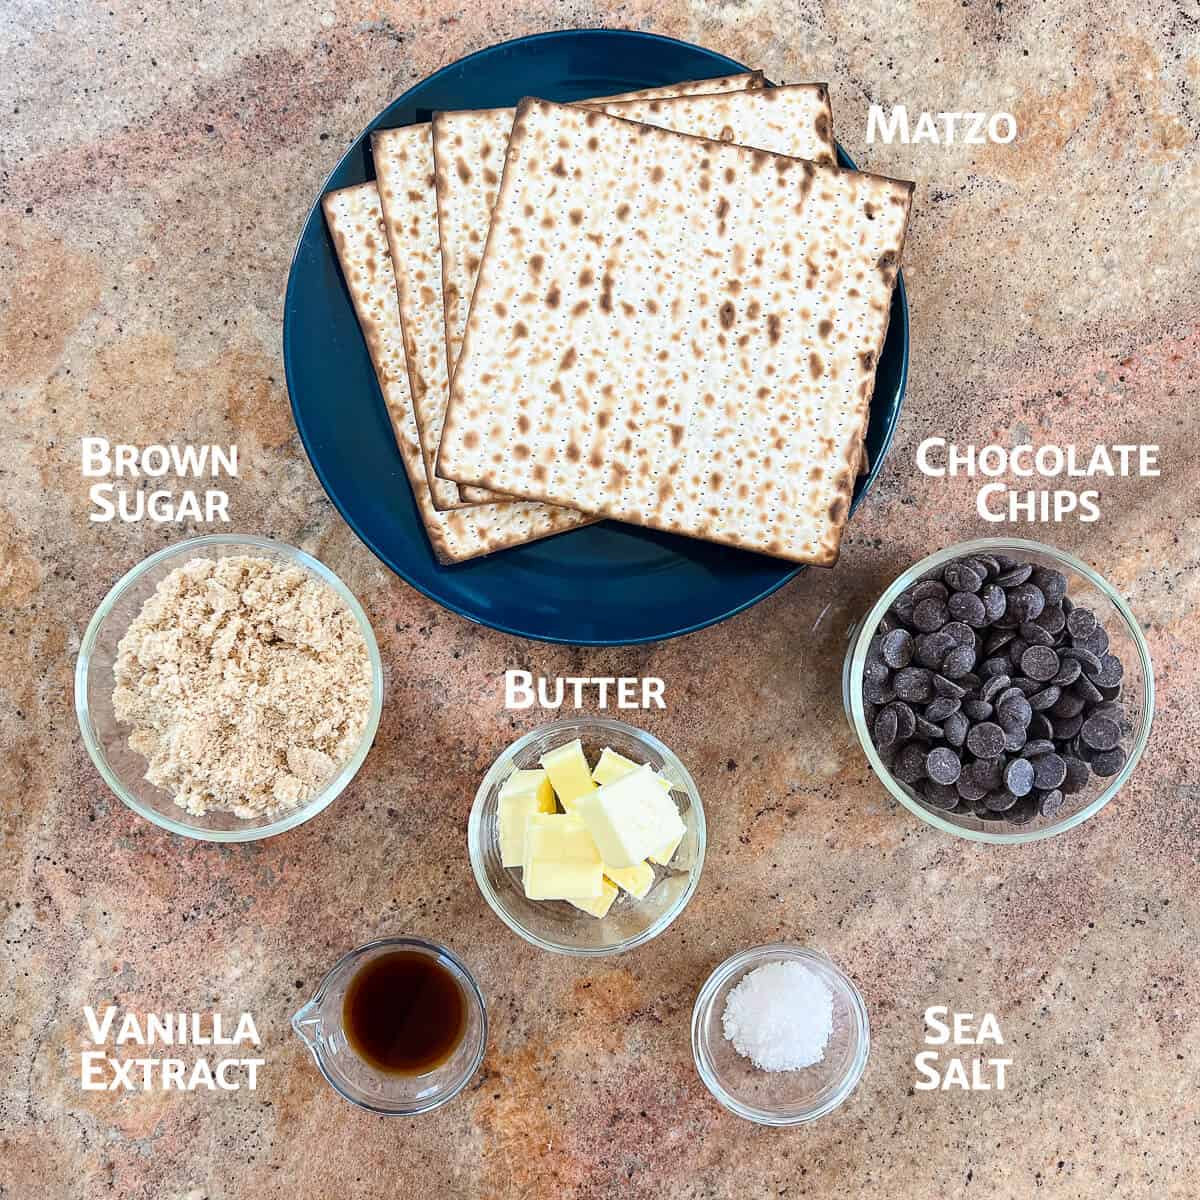 Matzo crack ingredients portioned into glass bowls with matzo on a blue plate.